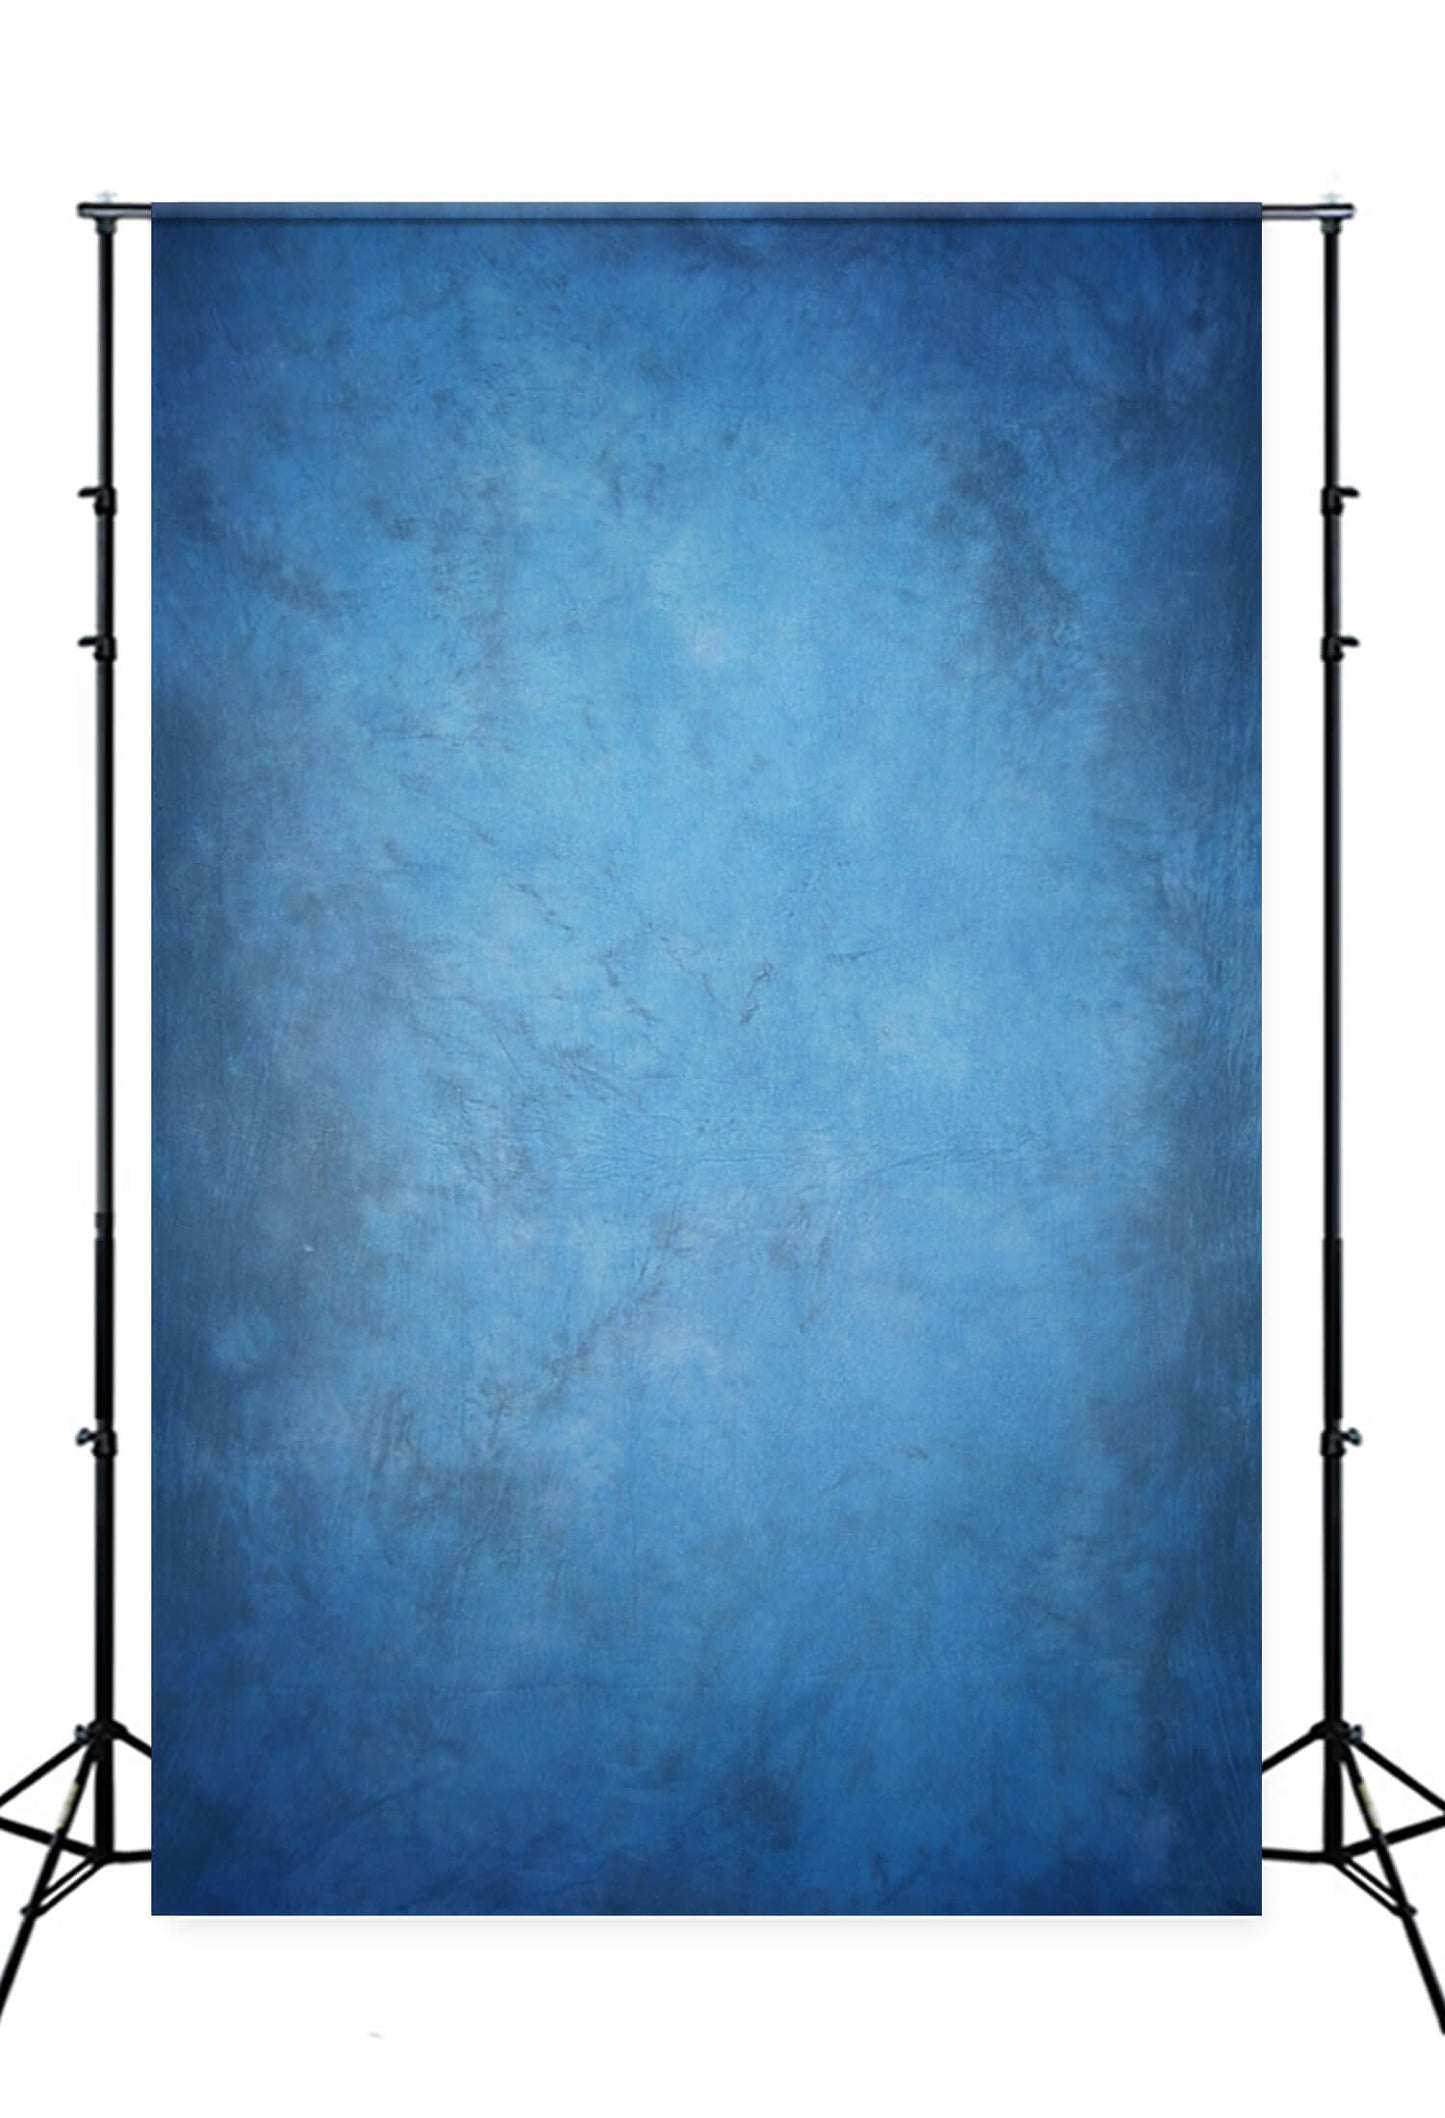 Abstract Blue Grunge  Texture Studio Backdrop for Photography DHP-488